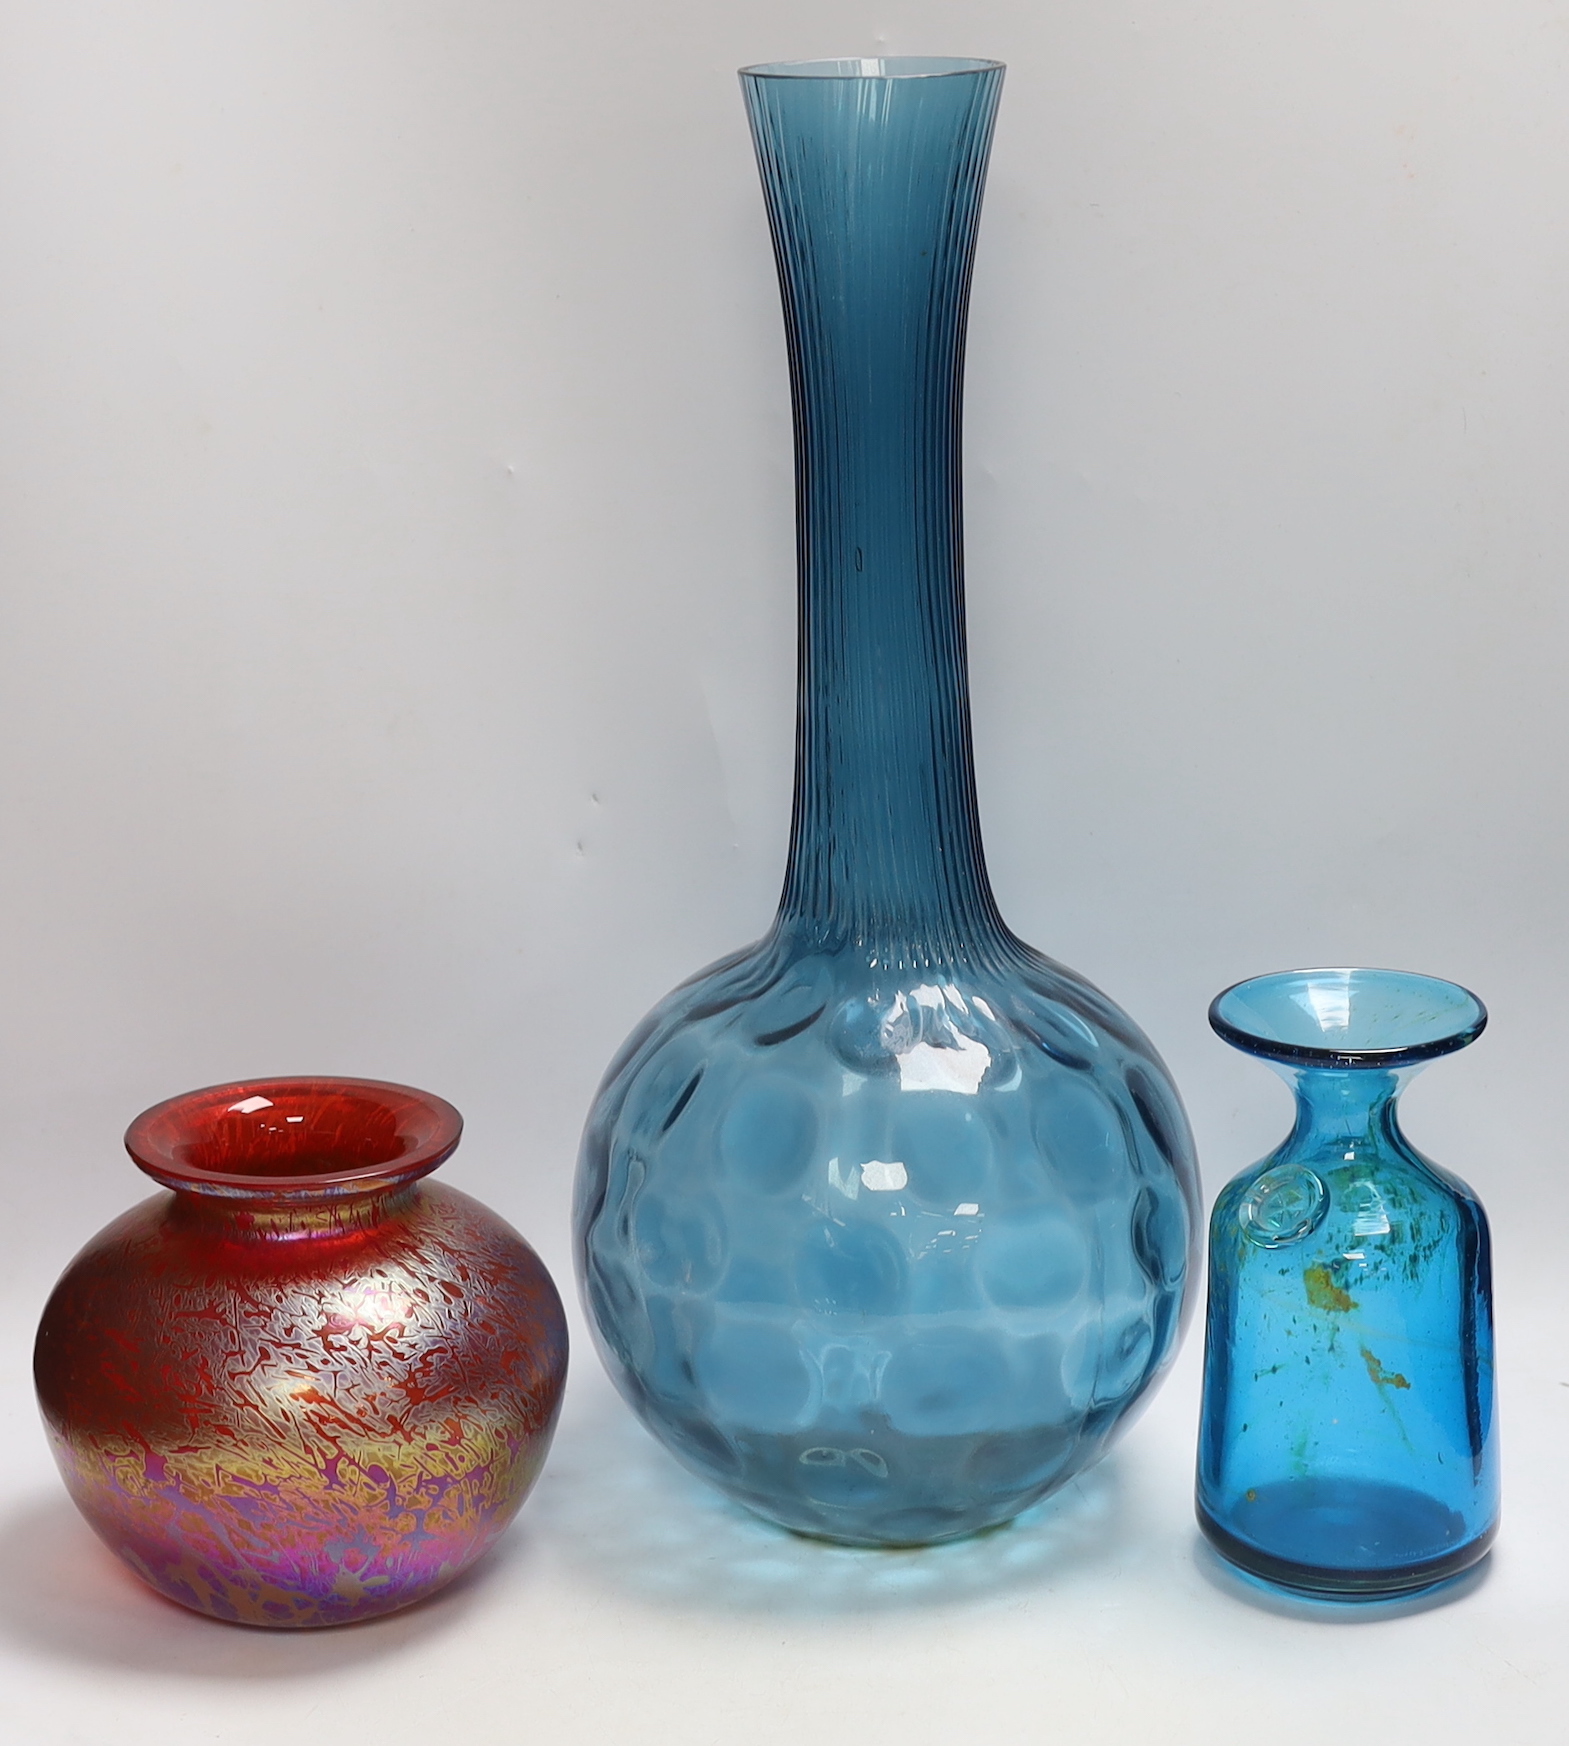 Nine pieces of art glassware including Royal Brierley vase and Wedgwood paperweight, largest 49cm high